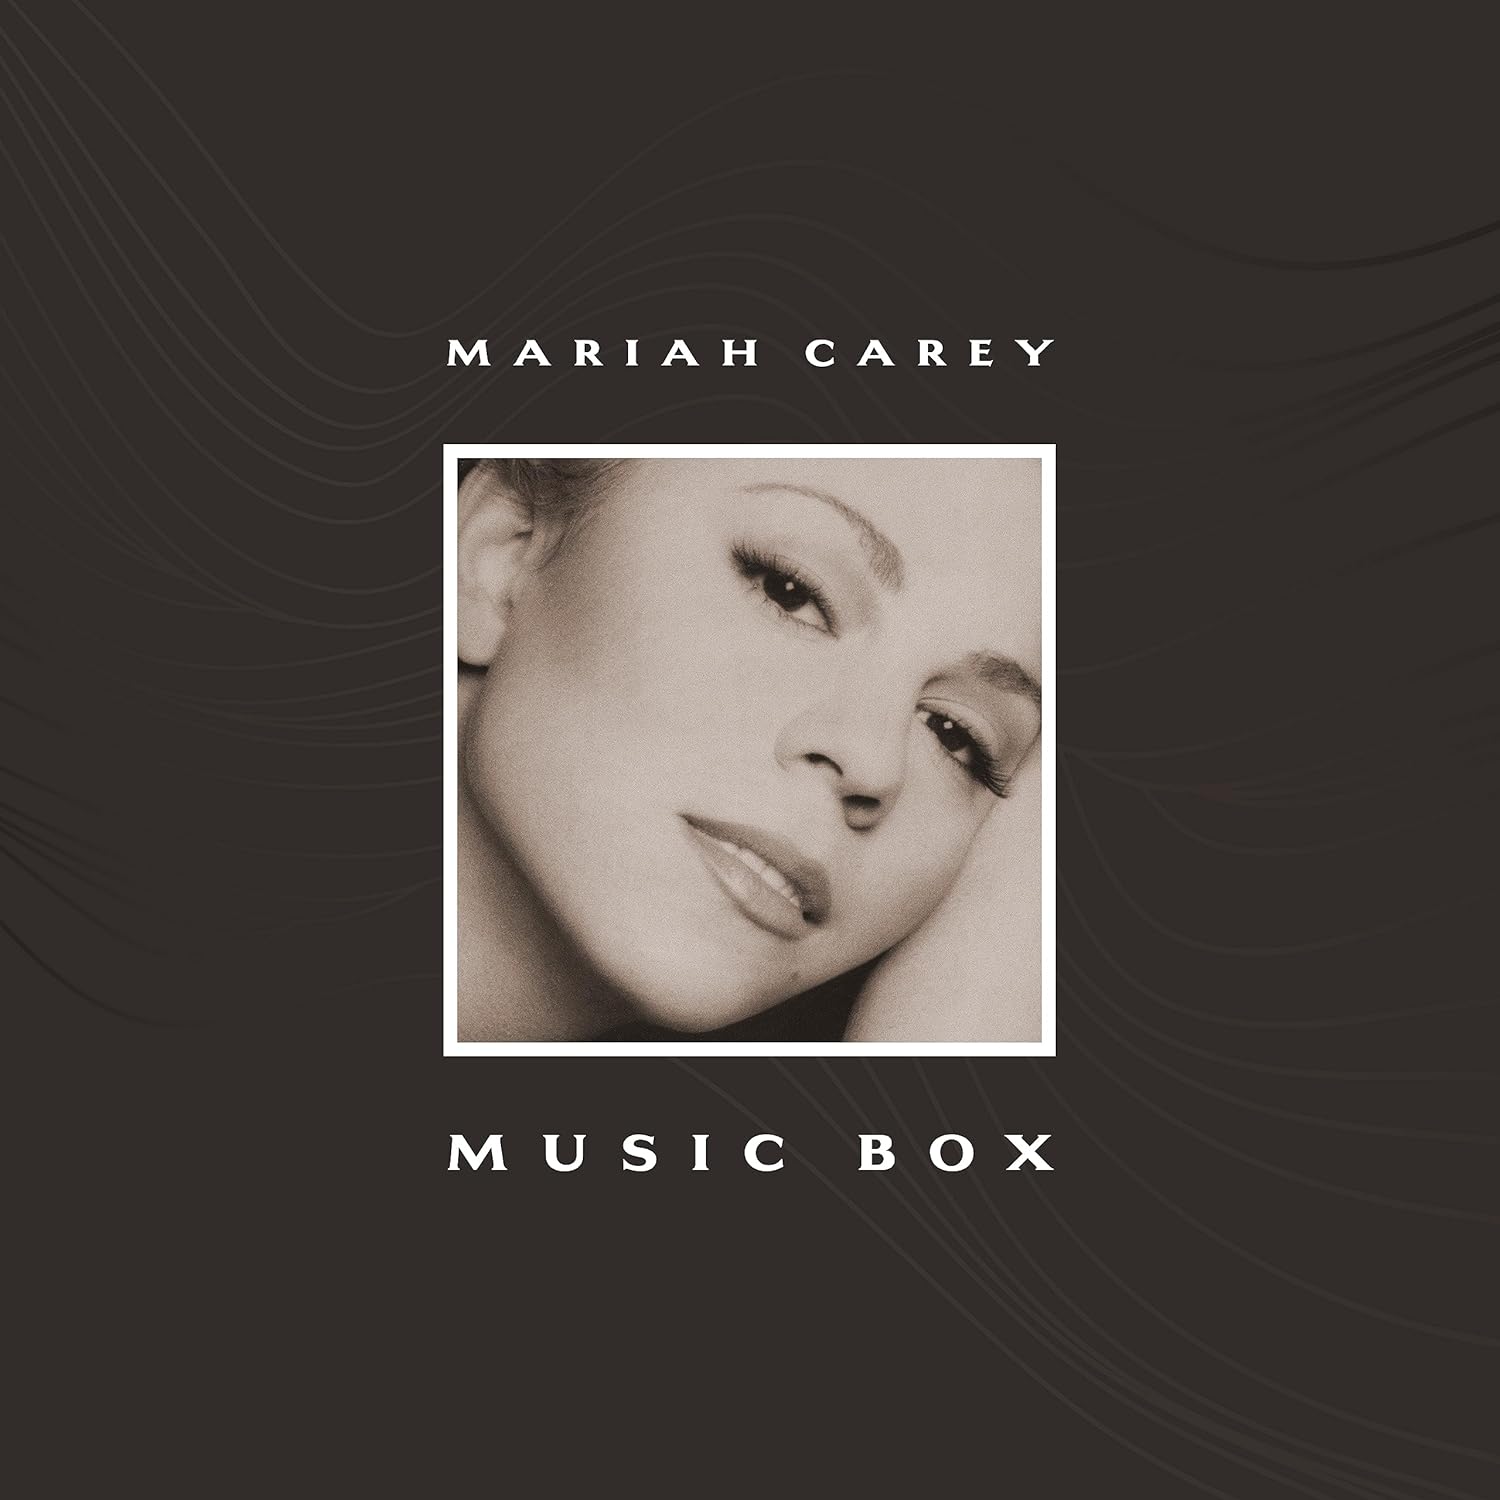 Music Box: 30th Anniversary Expanded Edition